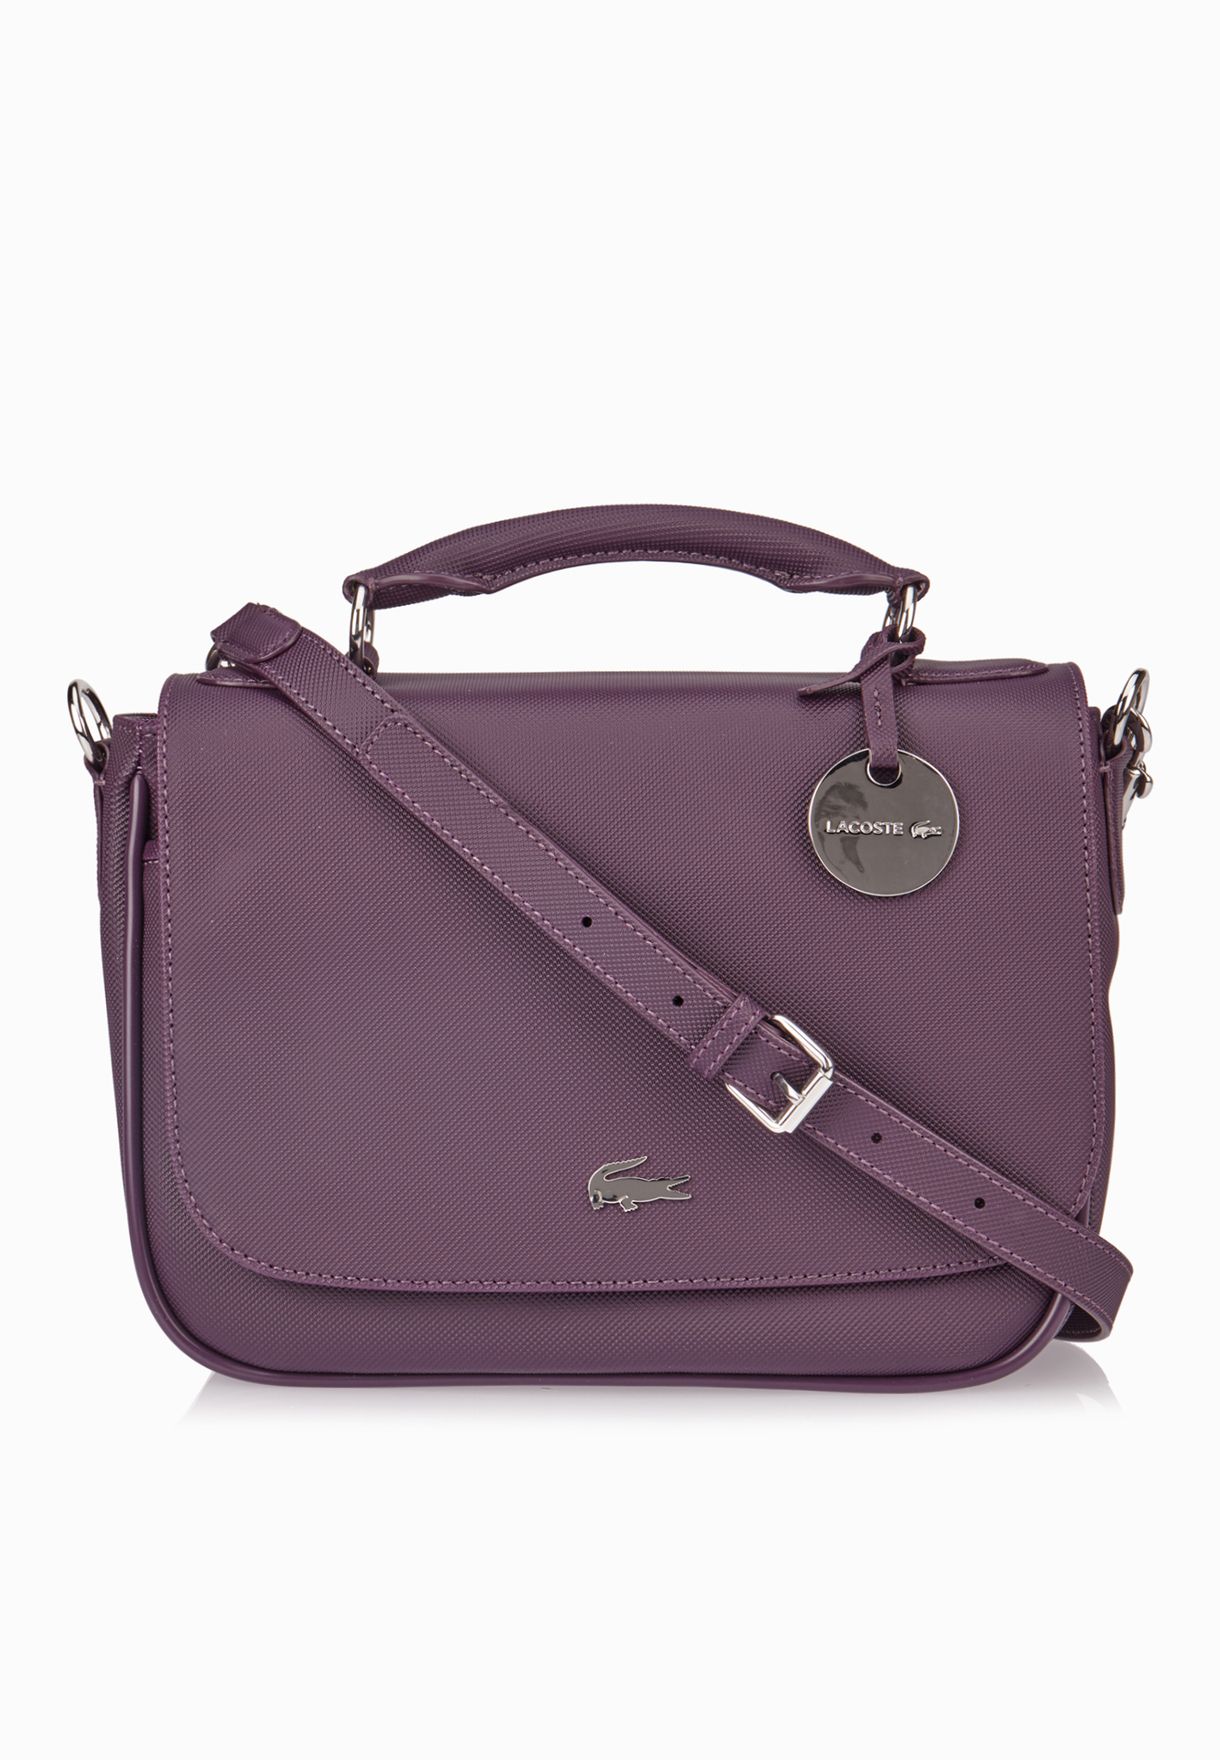 lacoste satchel bag price Cheaper Than 